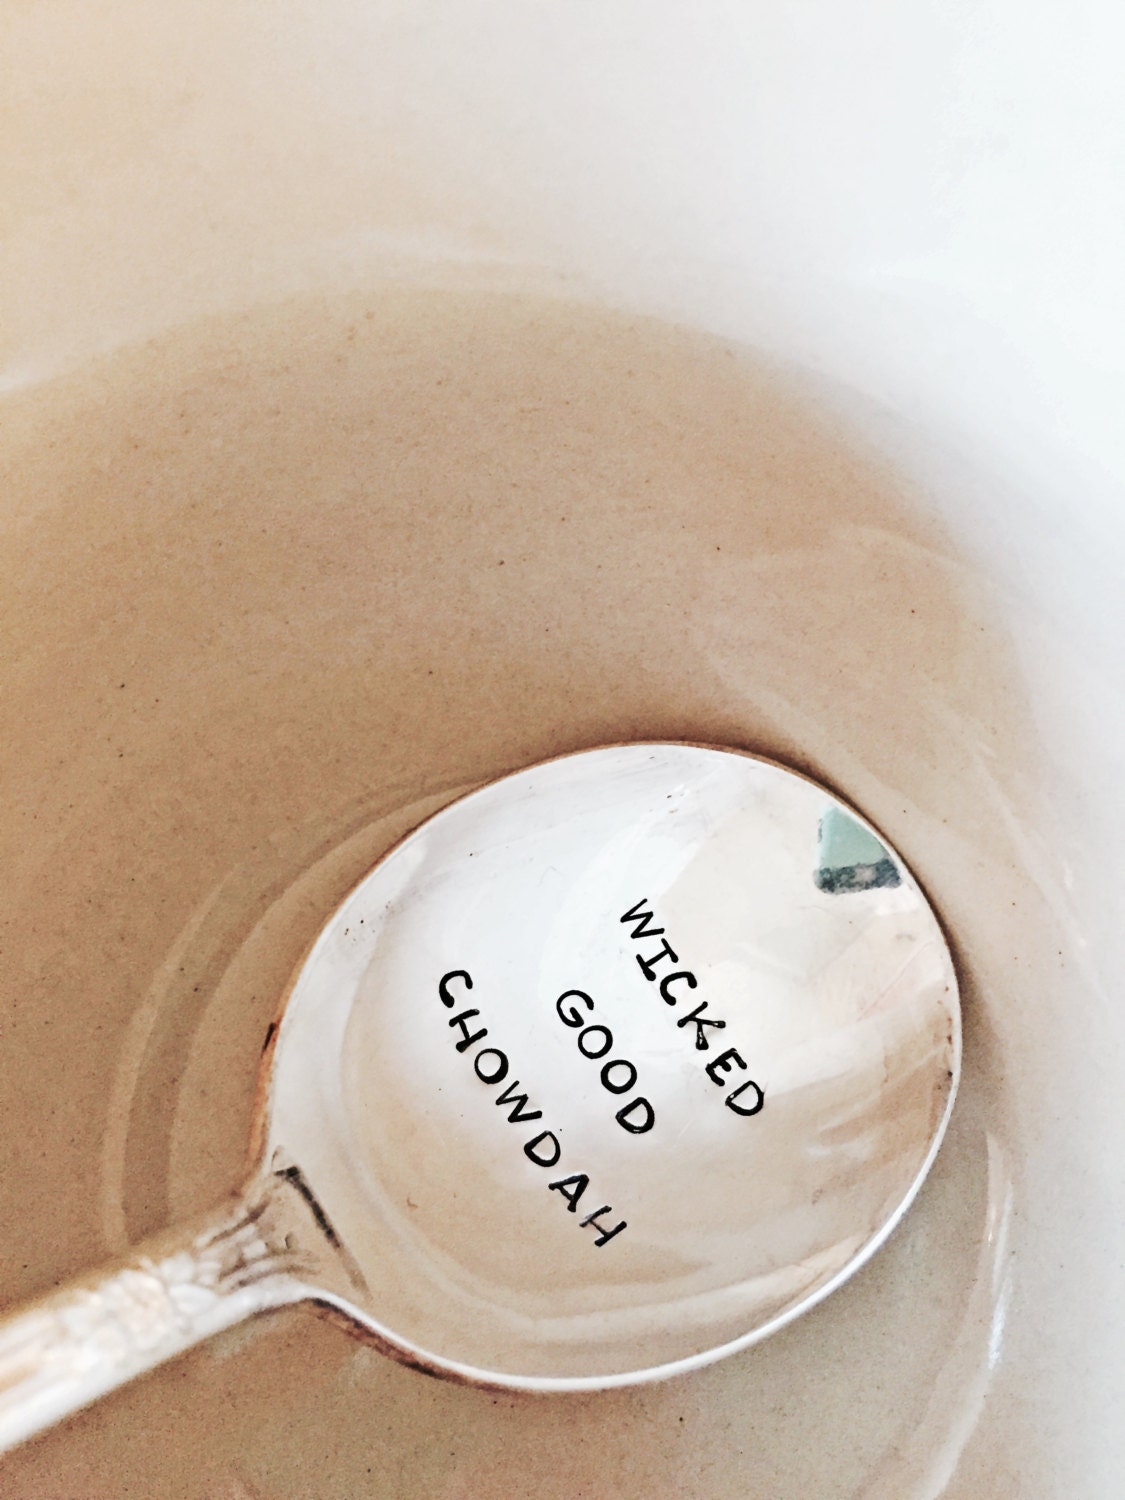 Wicked Good Chowdah, Stamped Silver Spoon, Silver, Soup Good, Chowder New England Gift, Maine